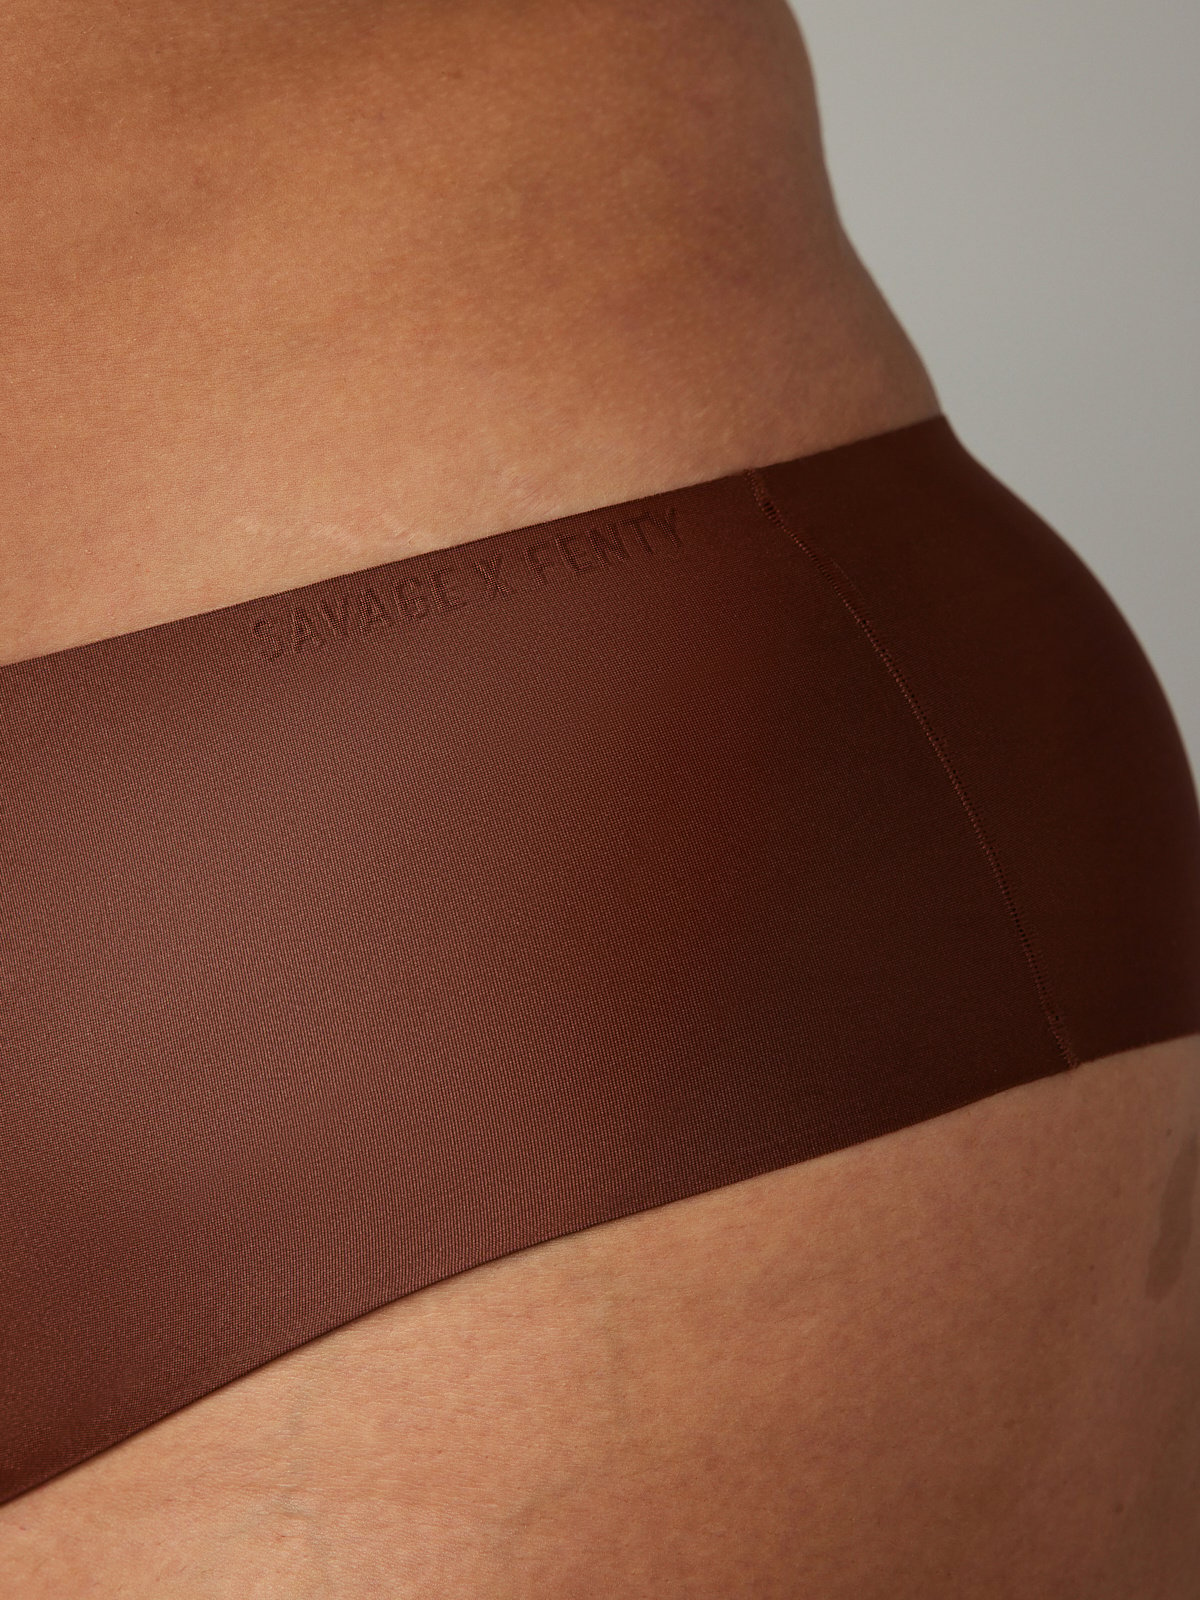 NEW Microfiber No-Show Hipster Panty in Brown